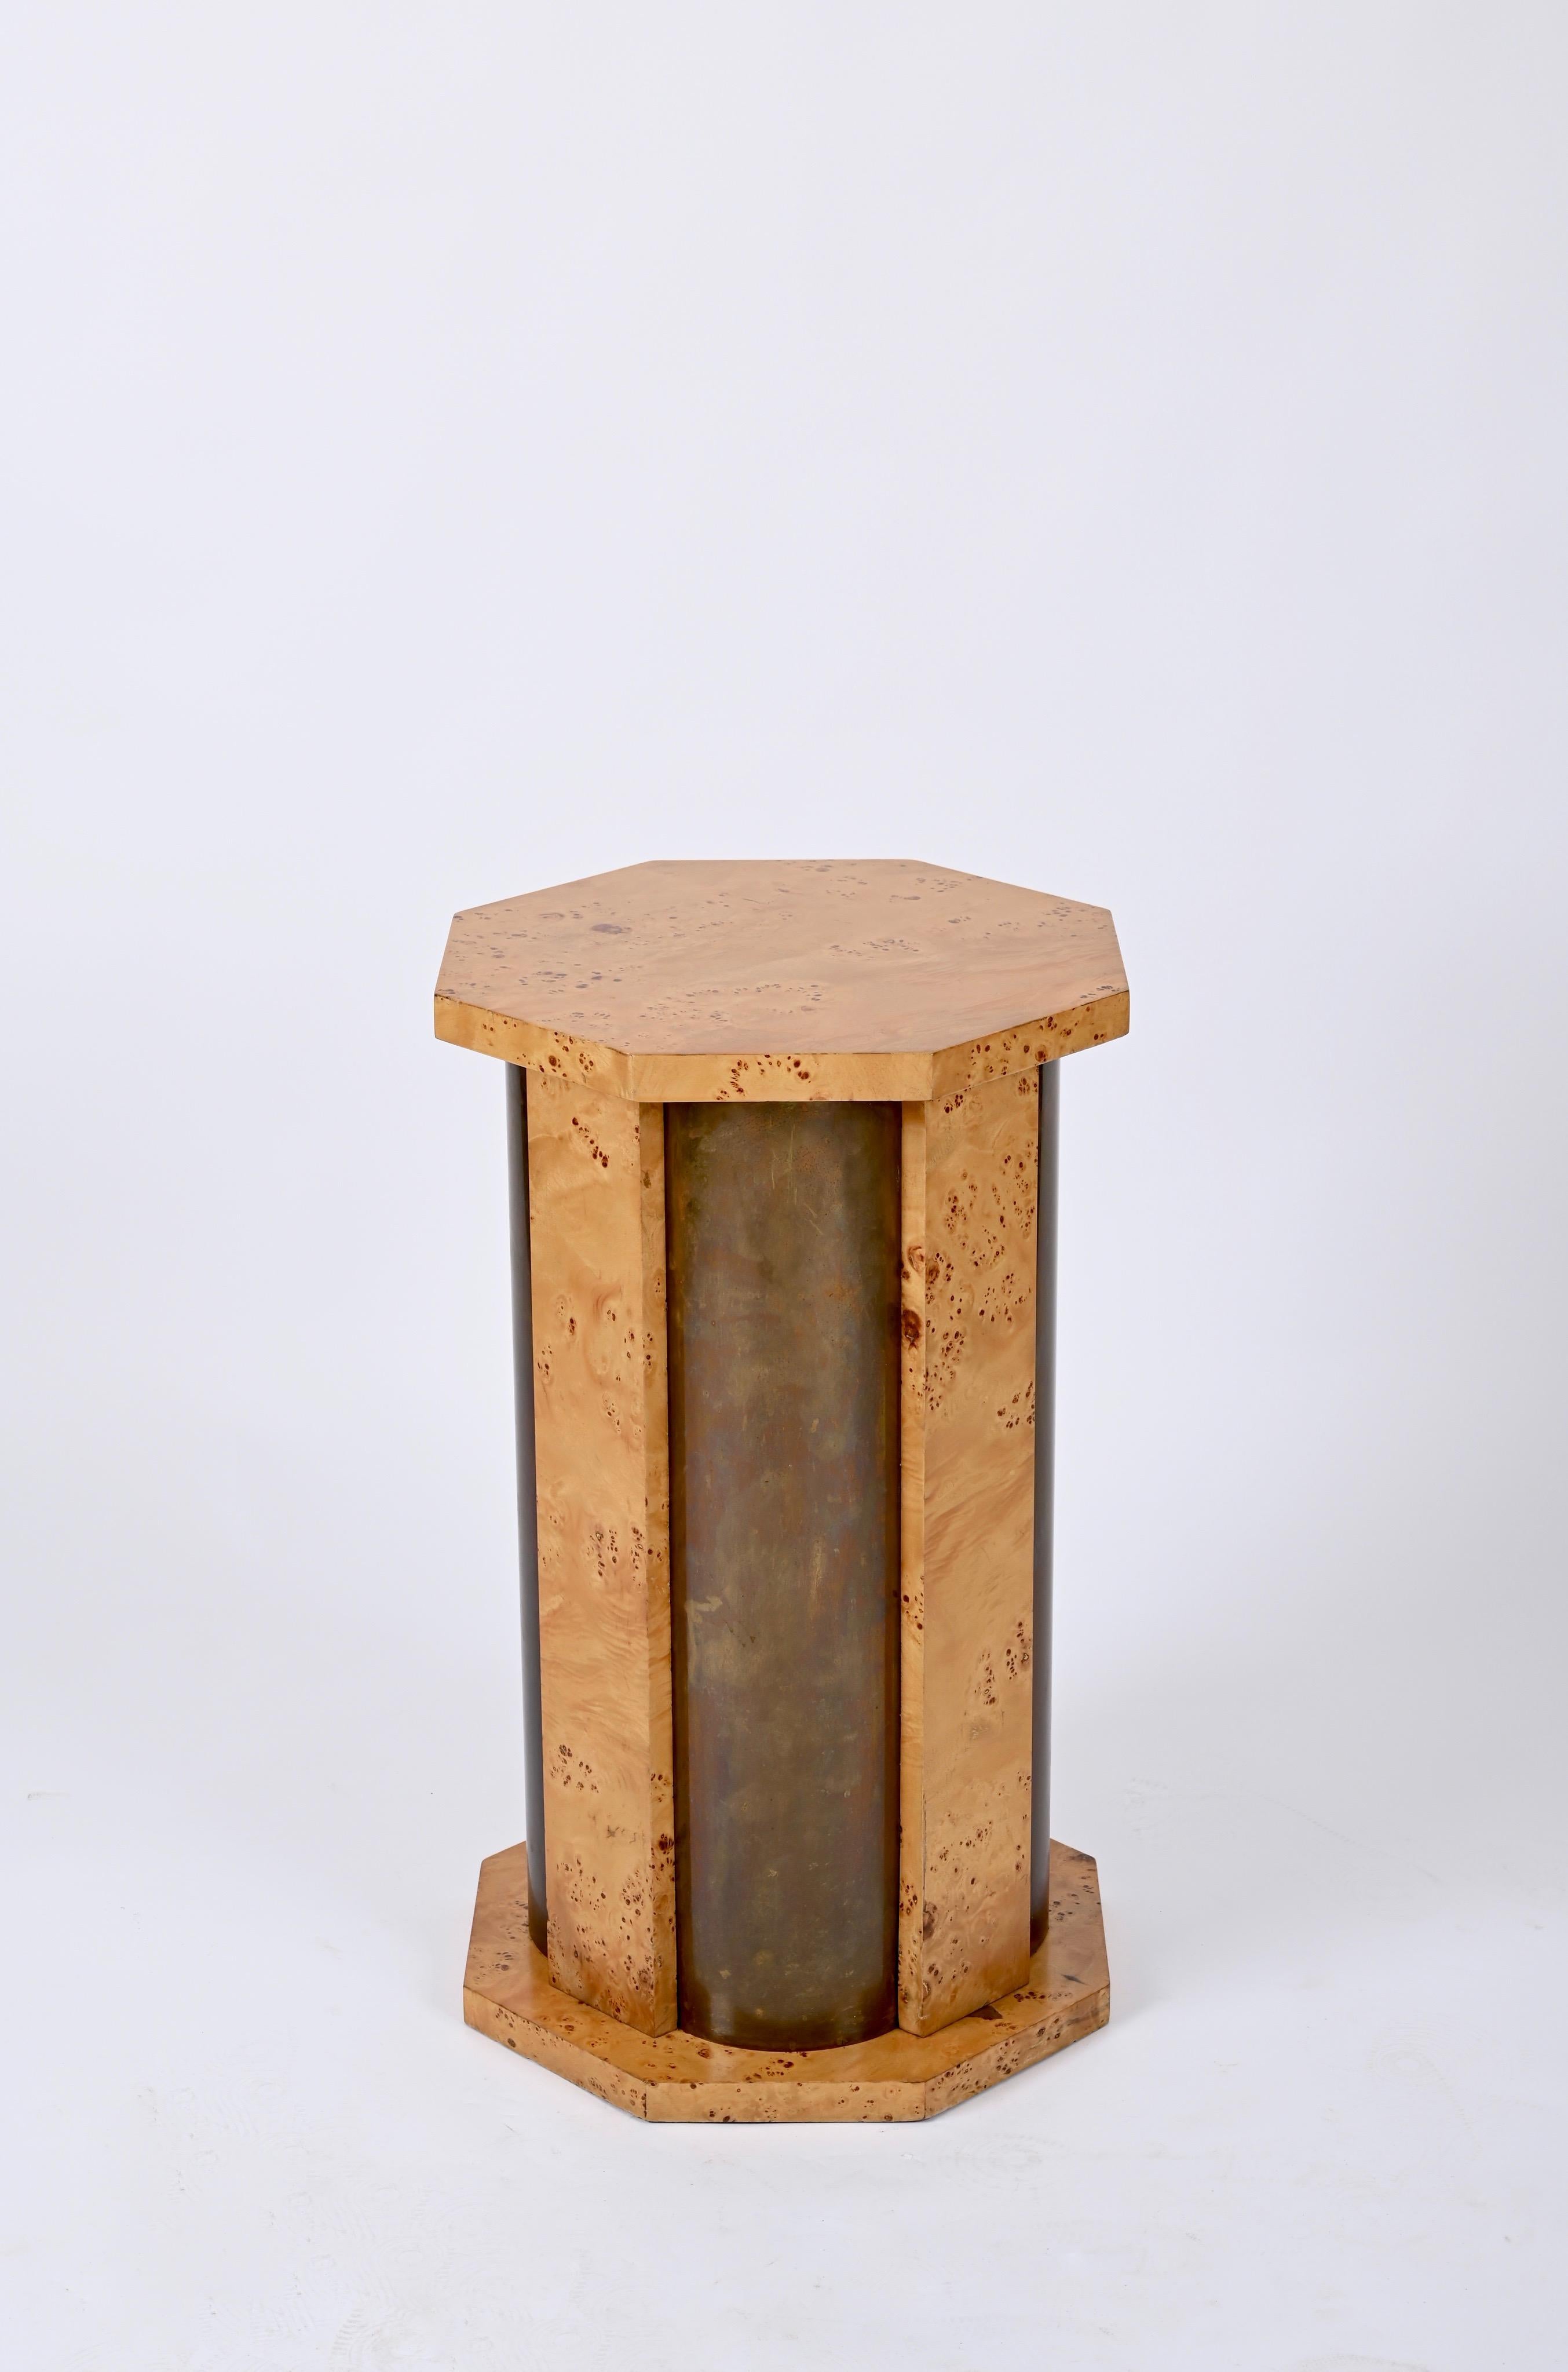 Tommaso Barbi Octagonal Table Pedestal in Burl Wood and Brass, Italy, 1970 For Sale 3